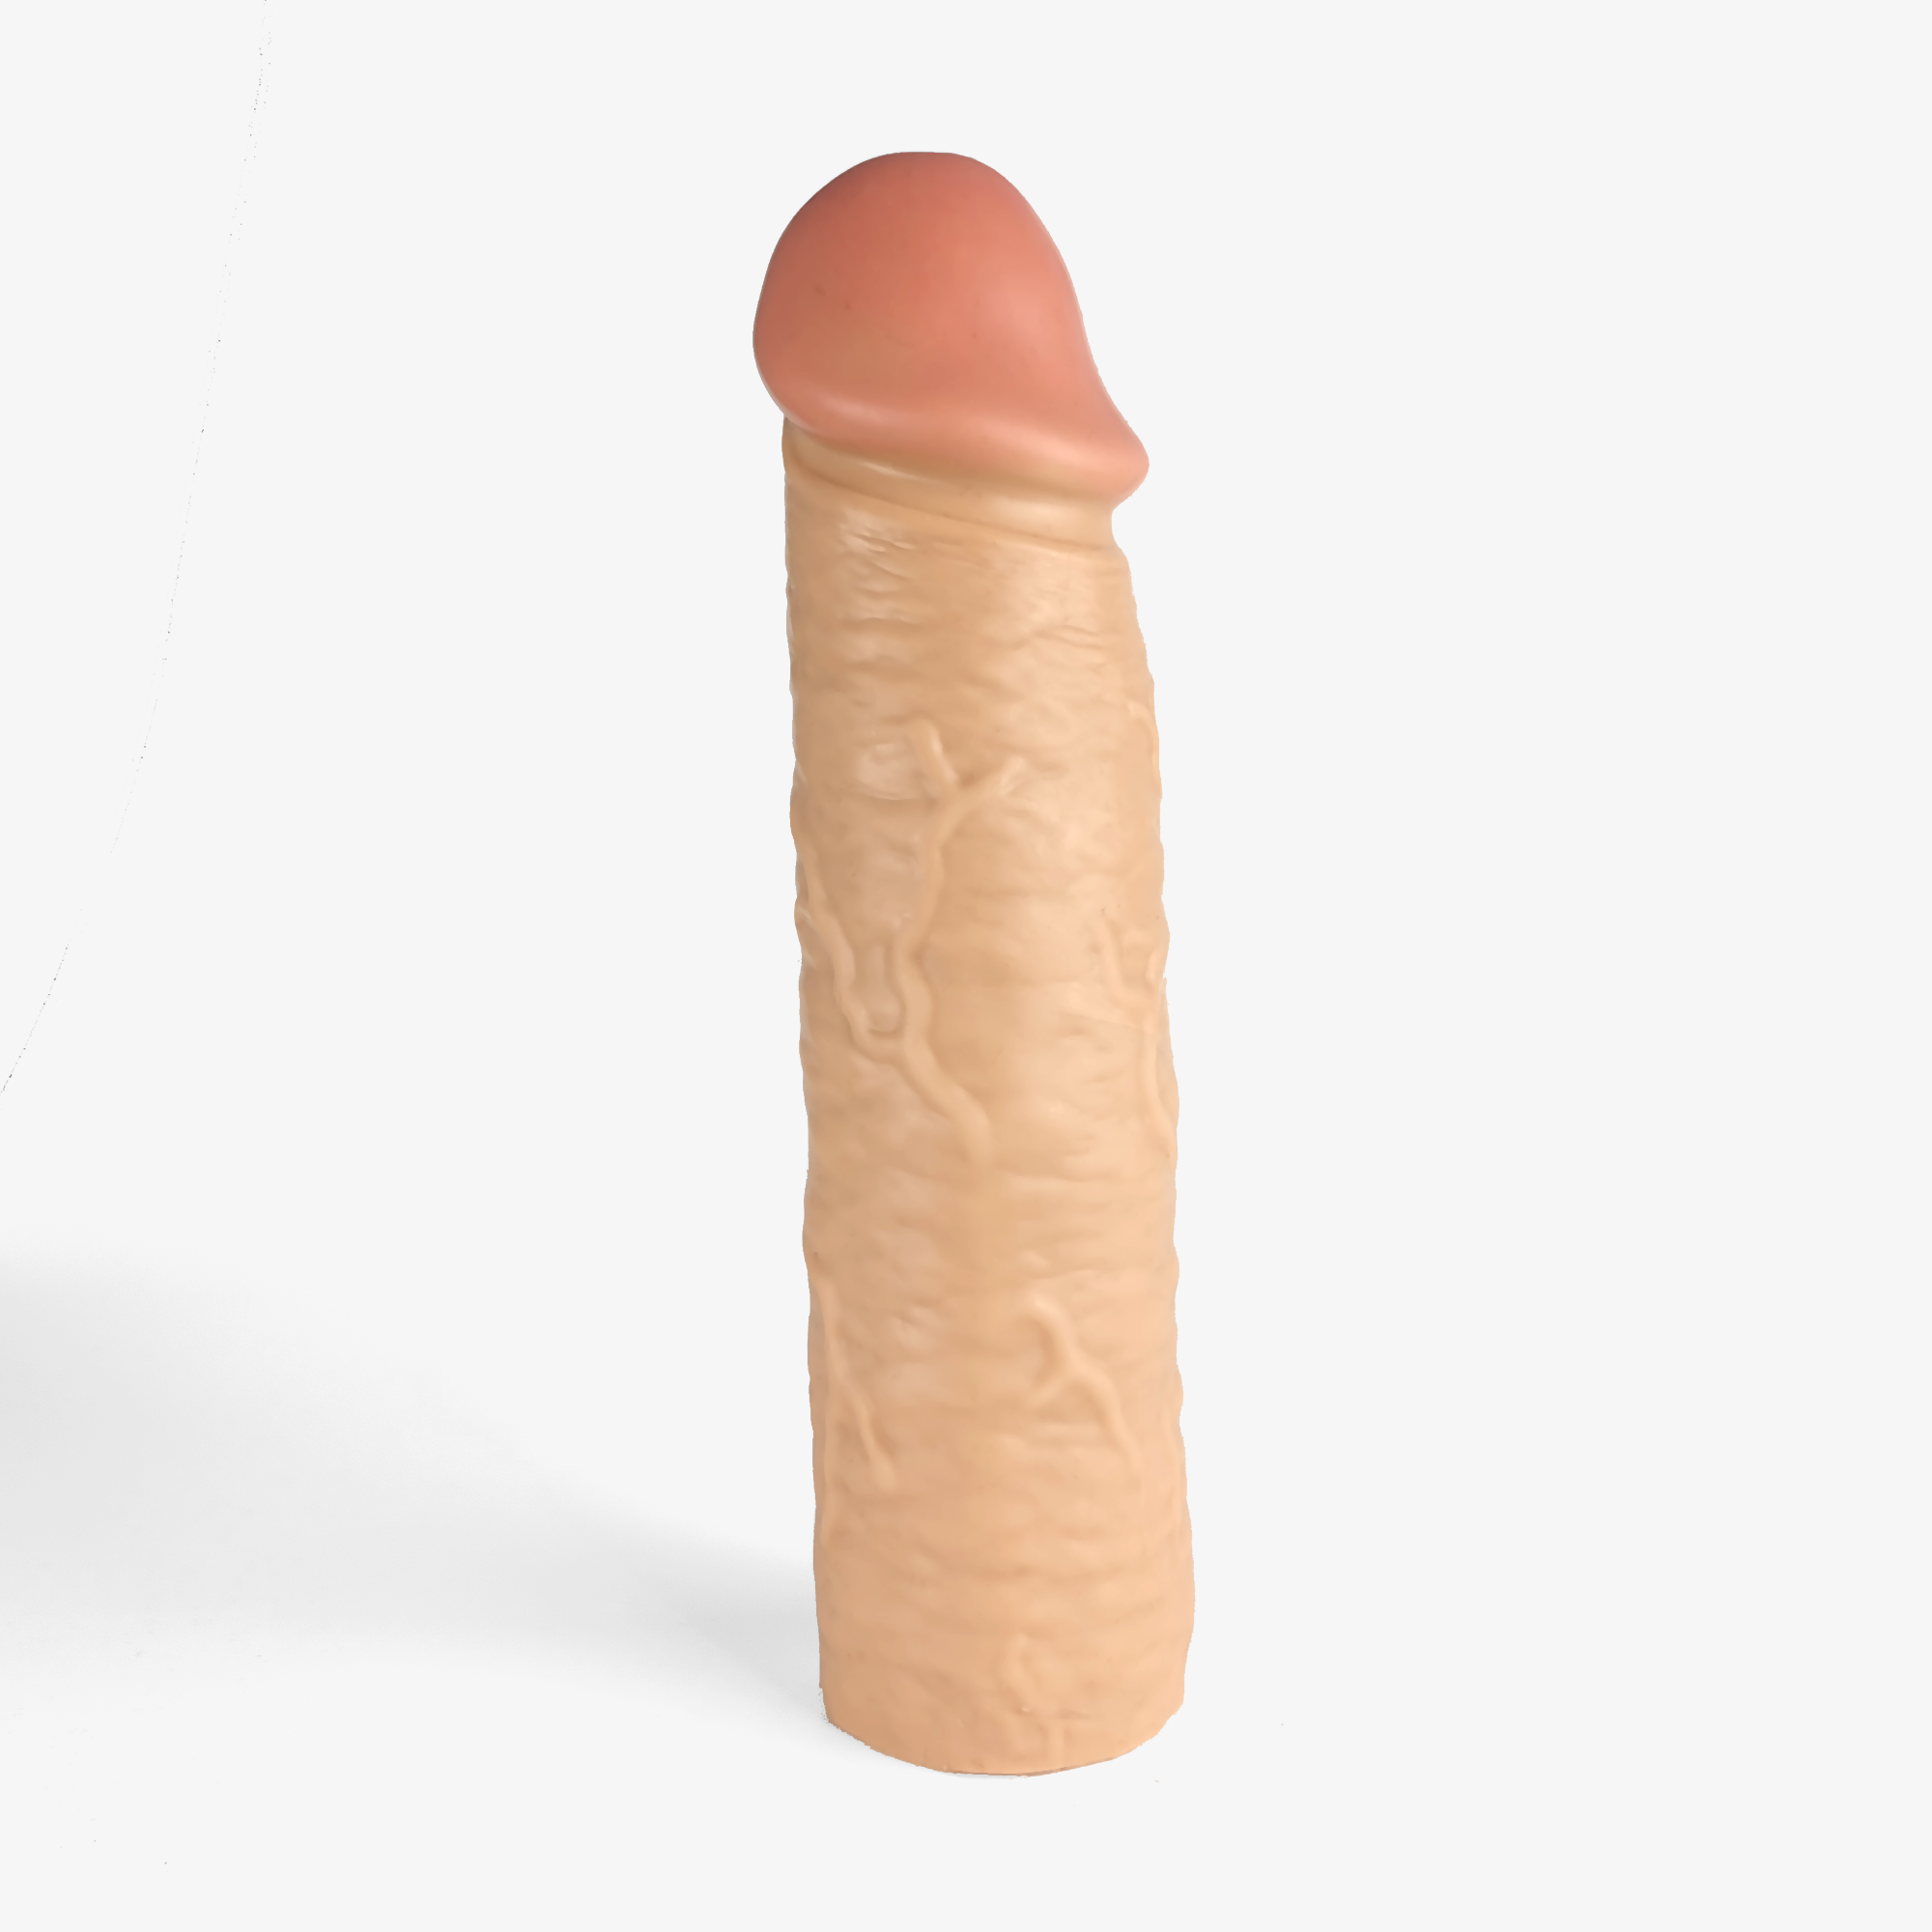 The Made To Measure Penis Extender